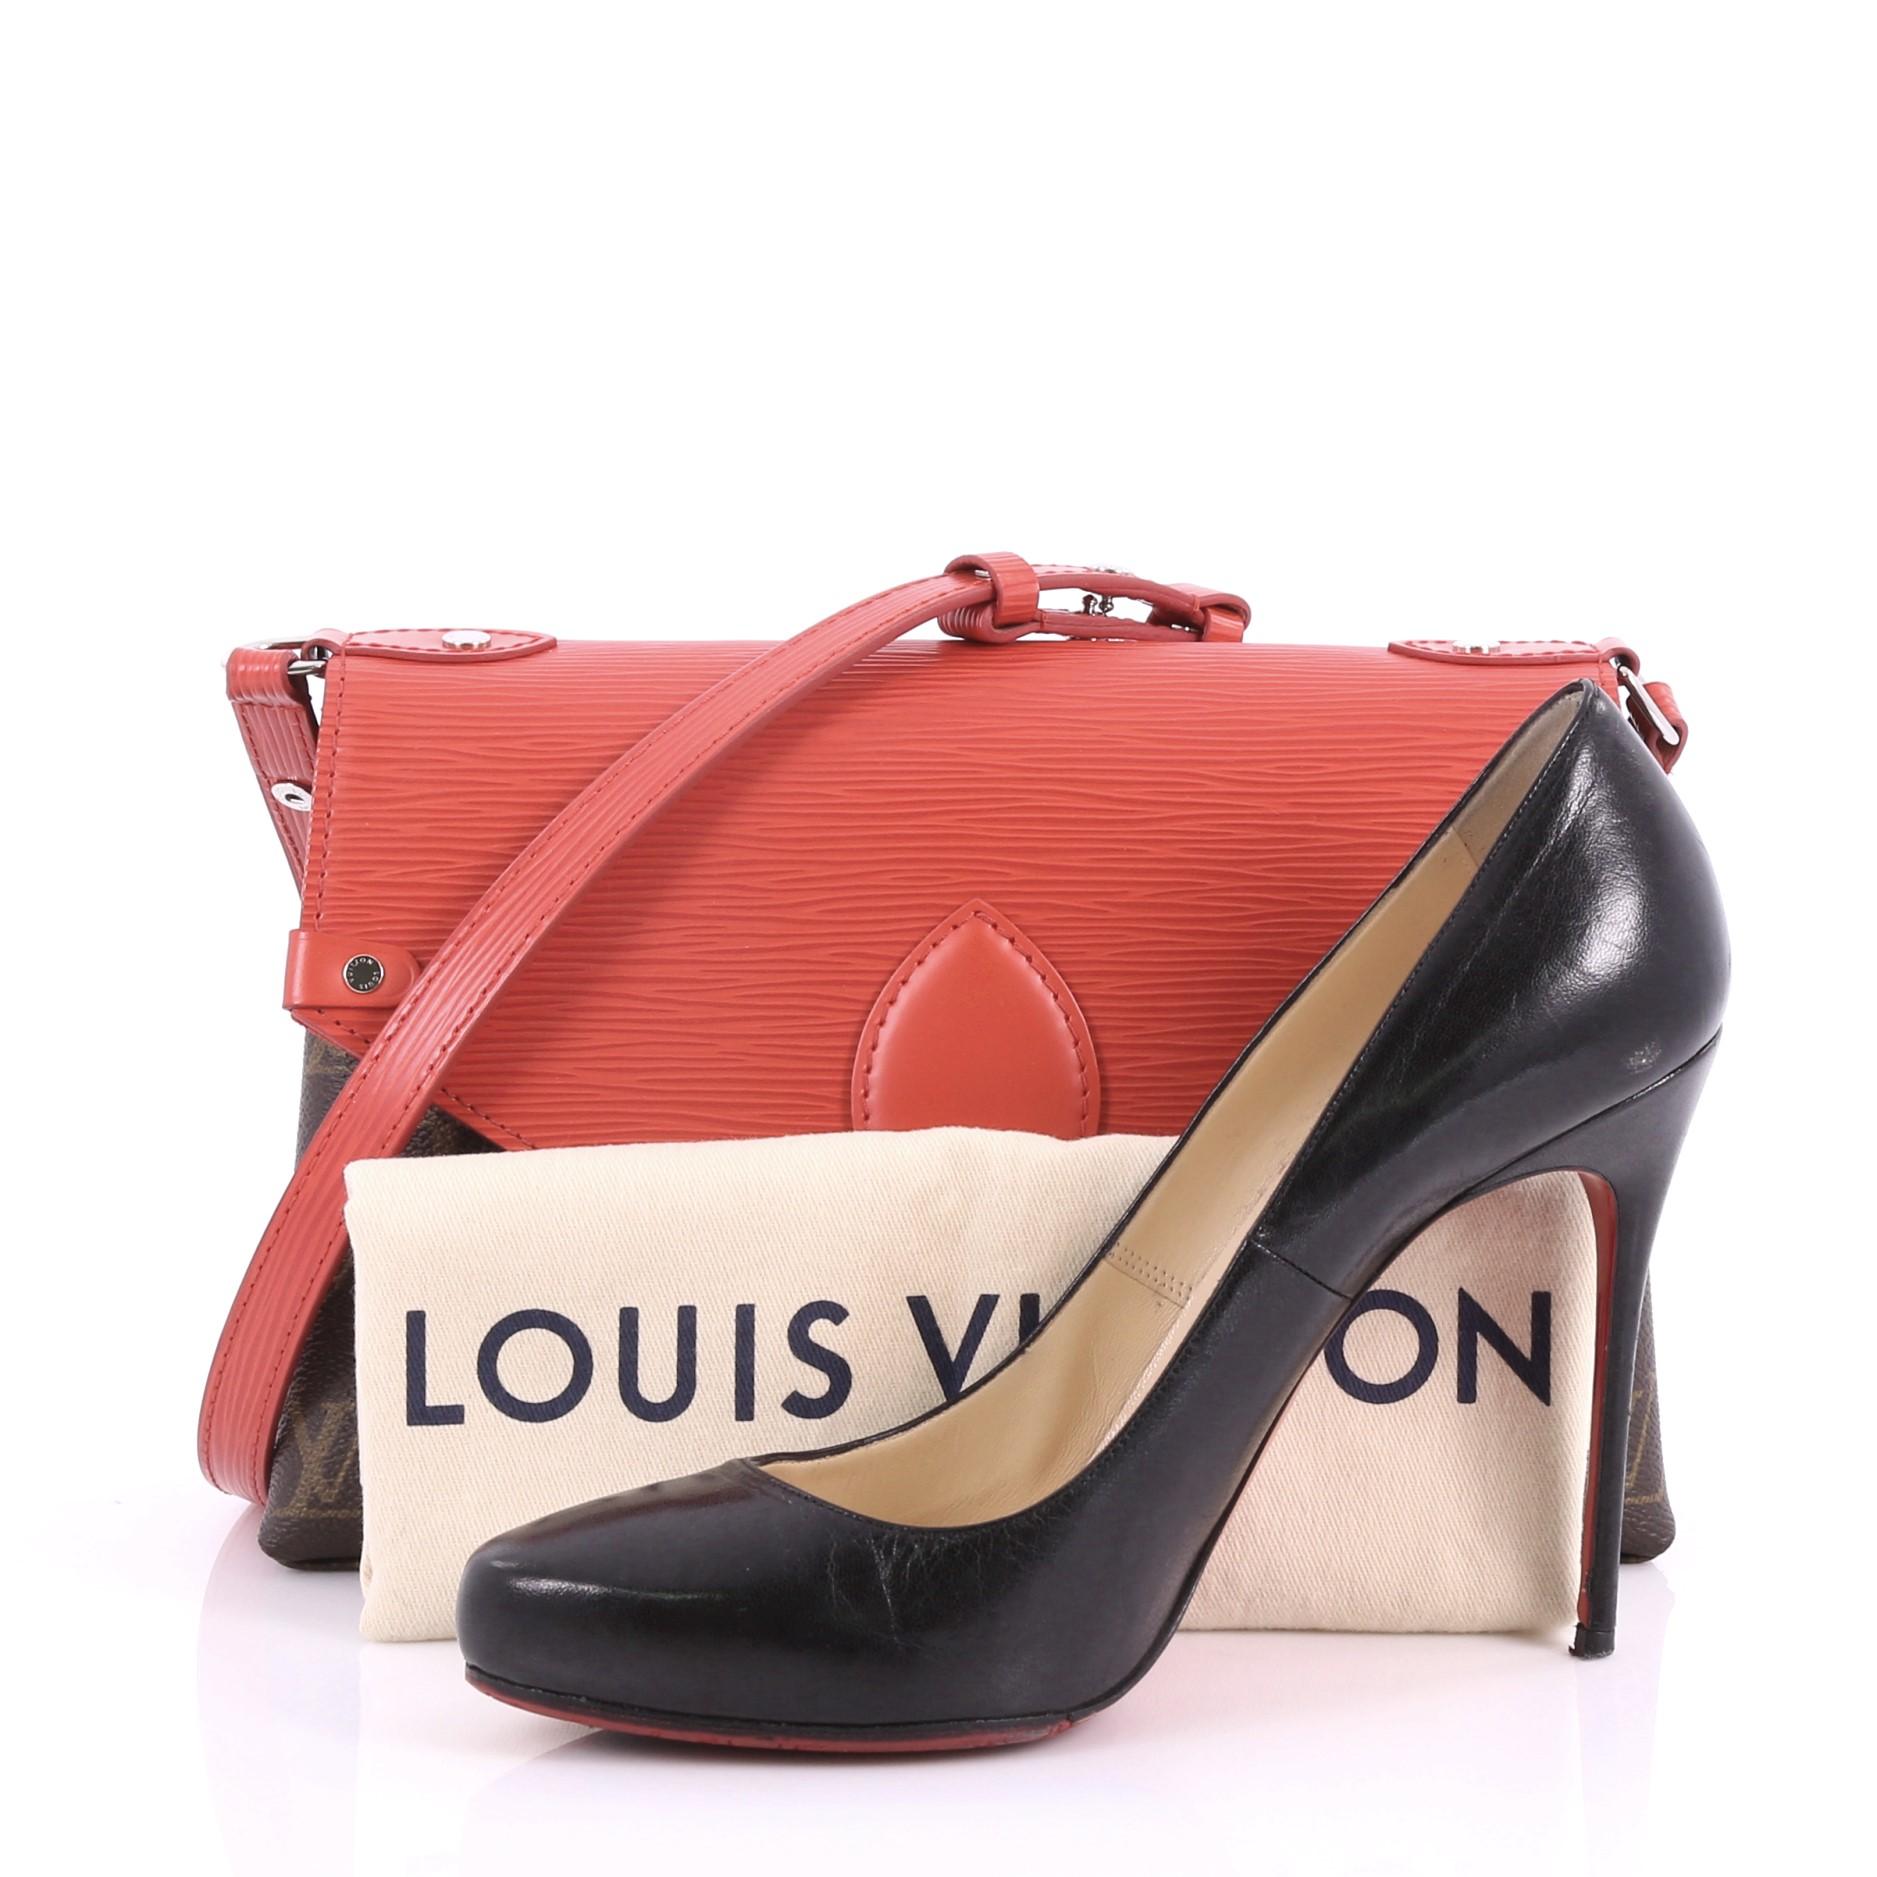 This authentic Louis Vuitton Saint Michel Handbag Monogram Canvas and Epi Leather, crafted in brown monogram coated canvas and red epi leather, features red leather shoulder strap, exterior back pocket and silver-tone hardware. Its magnetic snap